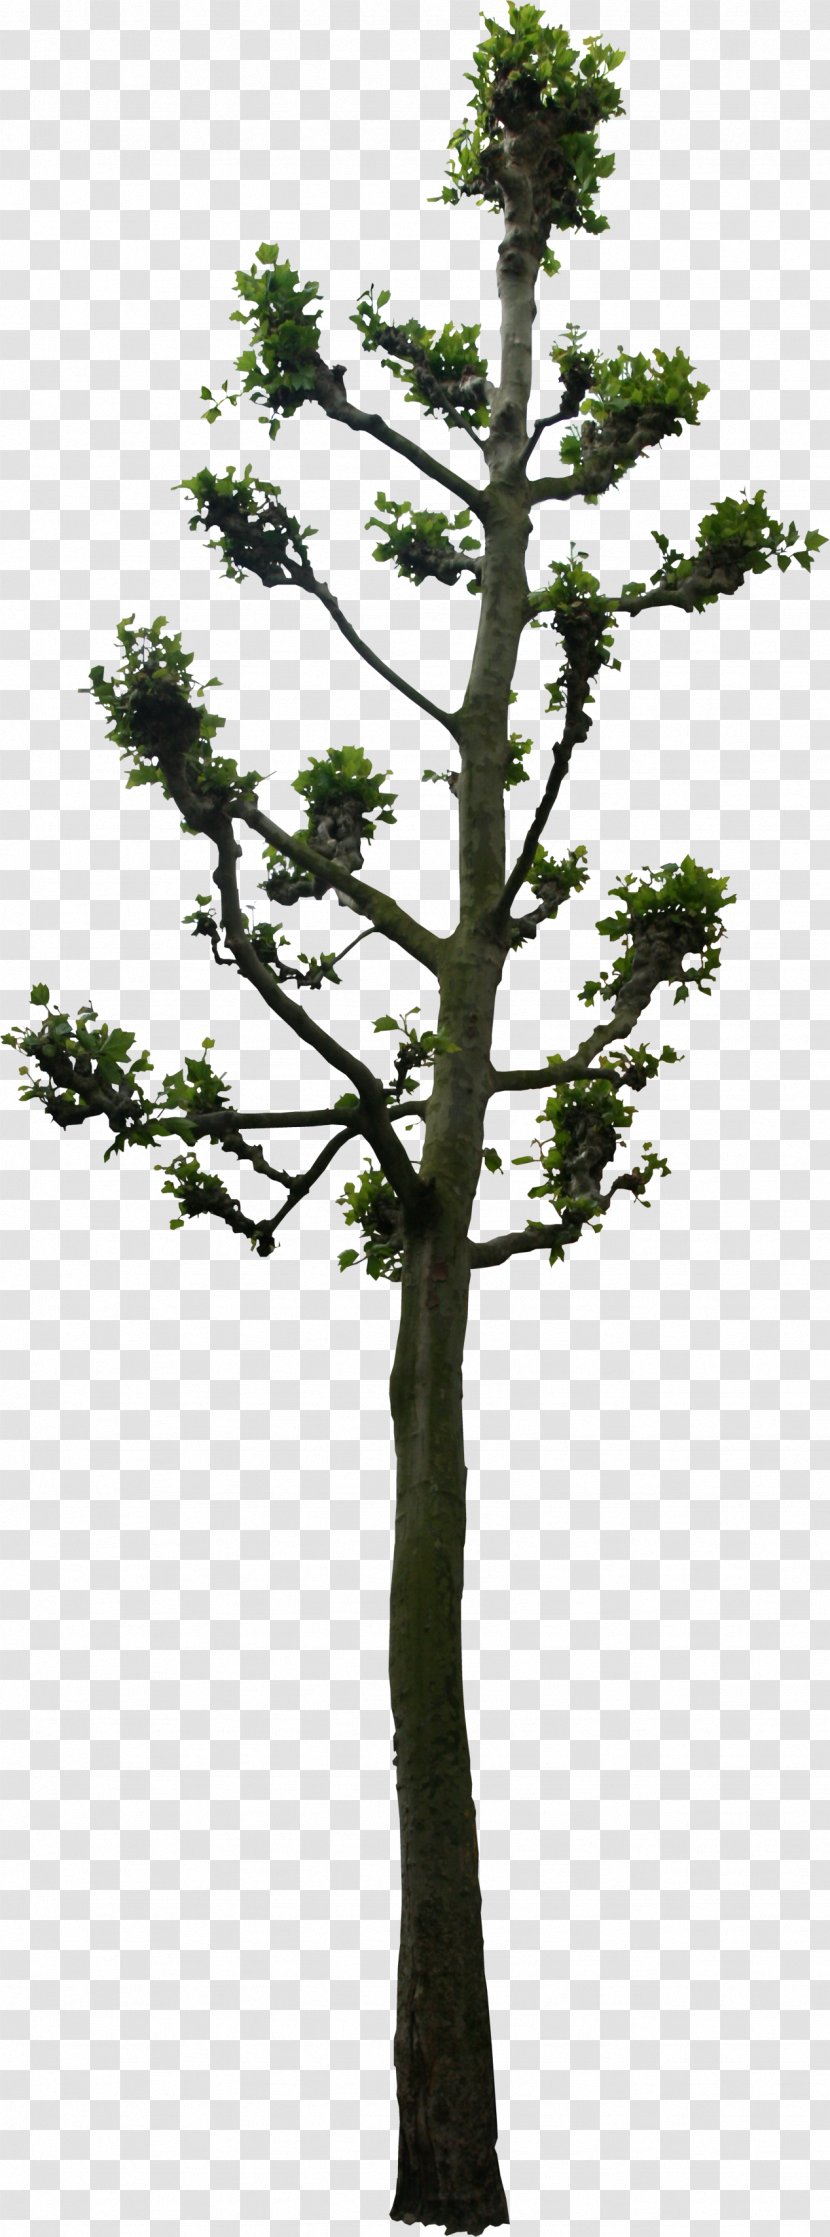 Tree Woody Plant Lindens 3D Computer Graphics - Evergreen Transparent PNG